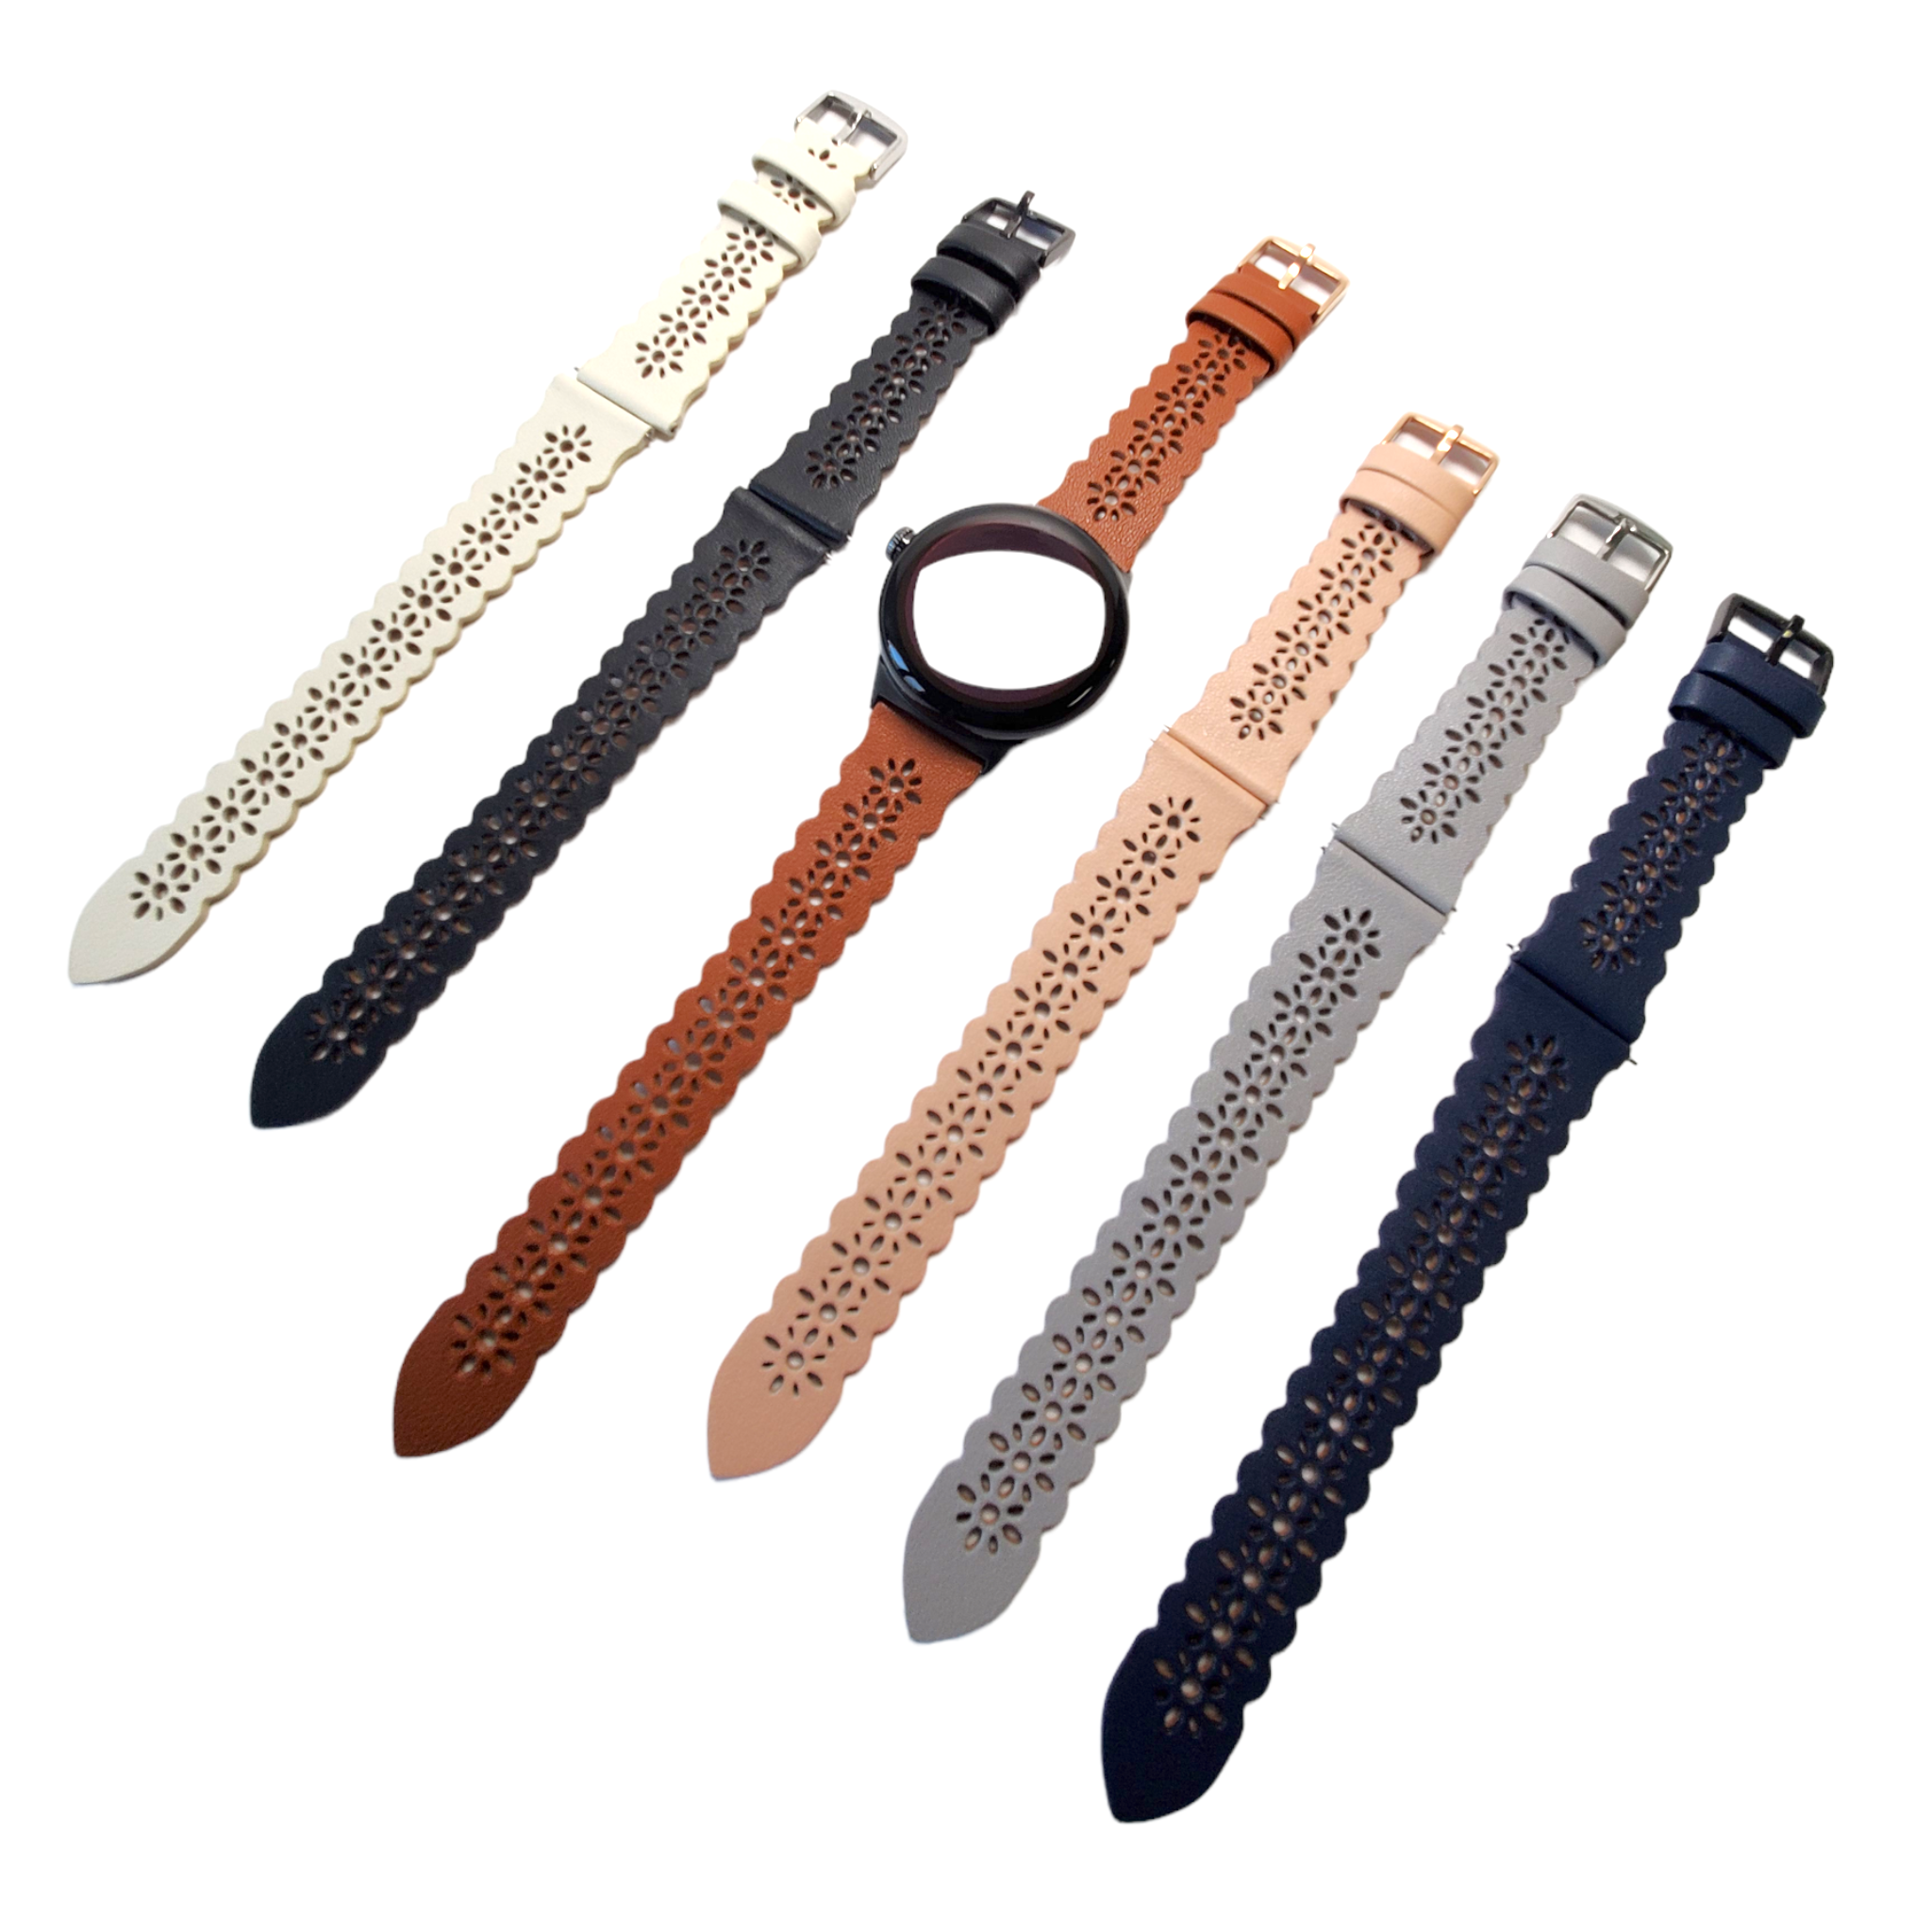 Lace Leather Bracelet Watch Band for Google Pixel